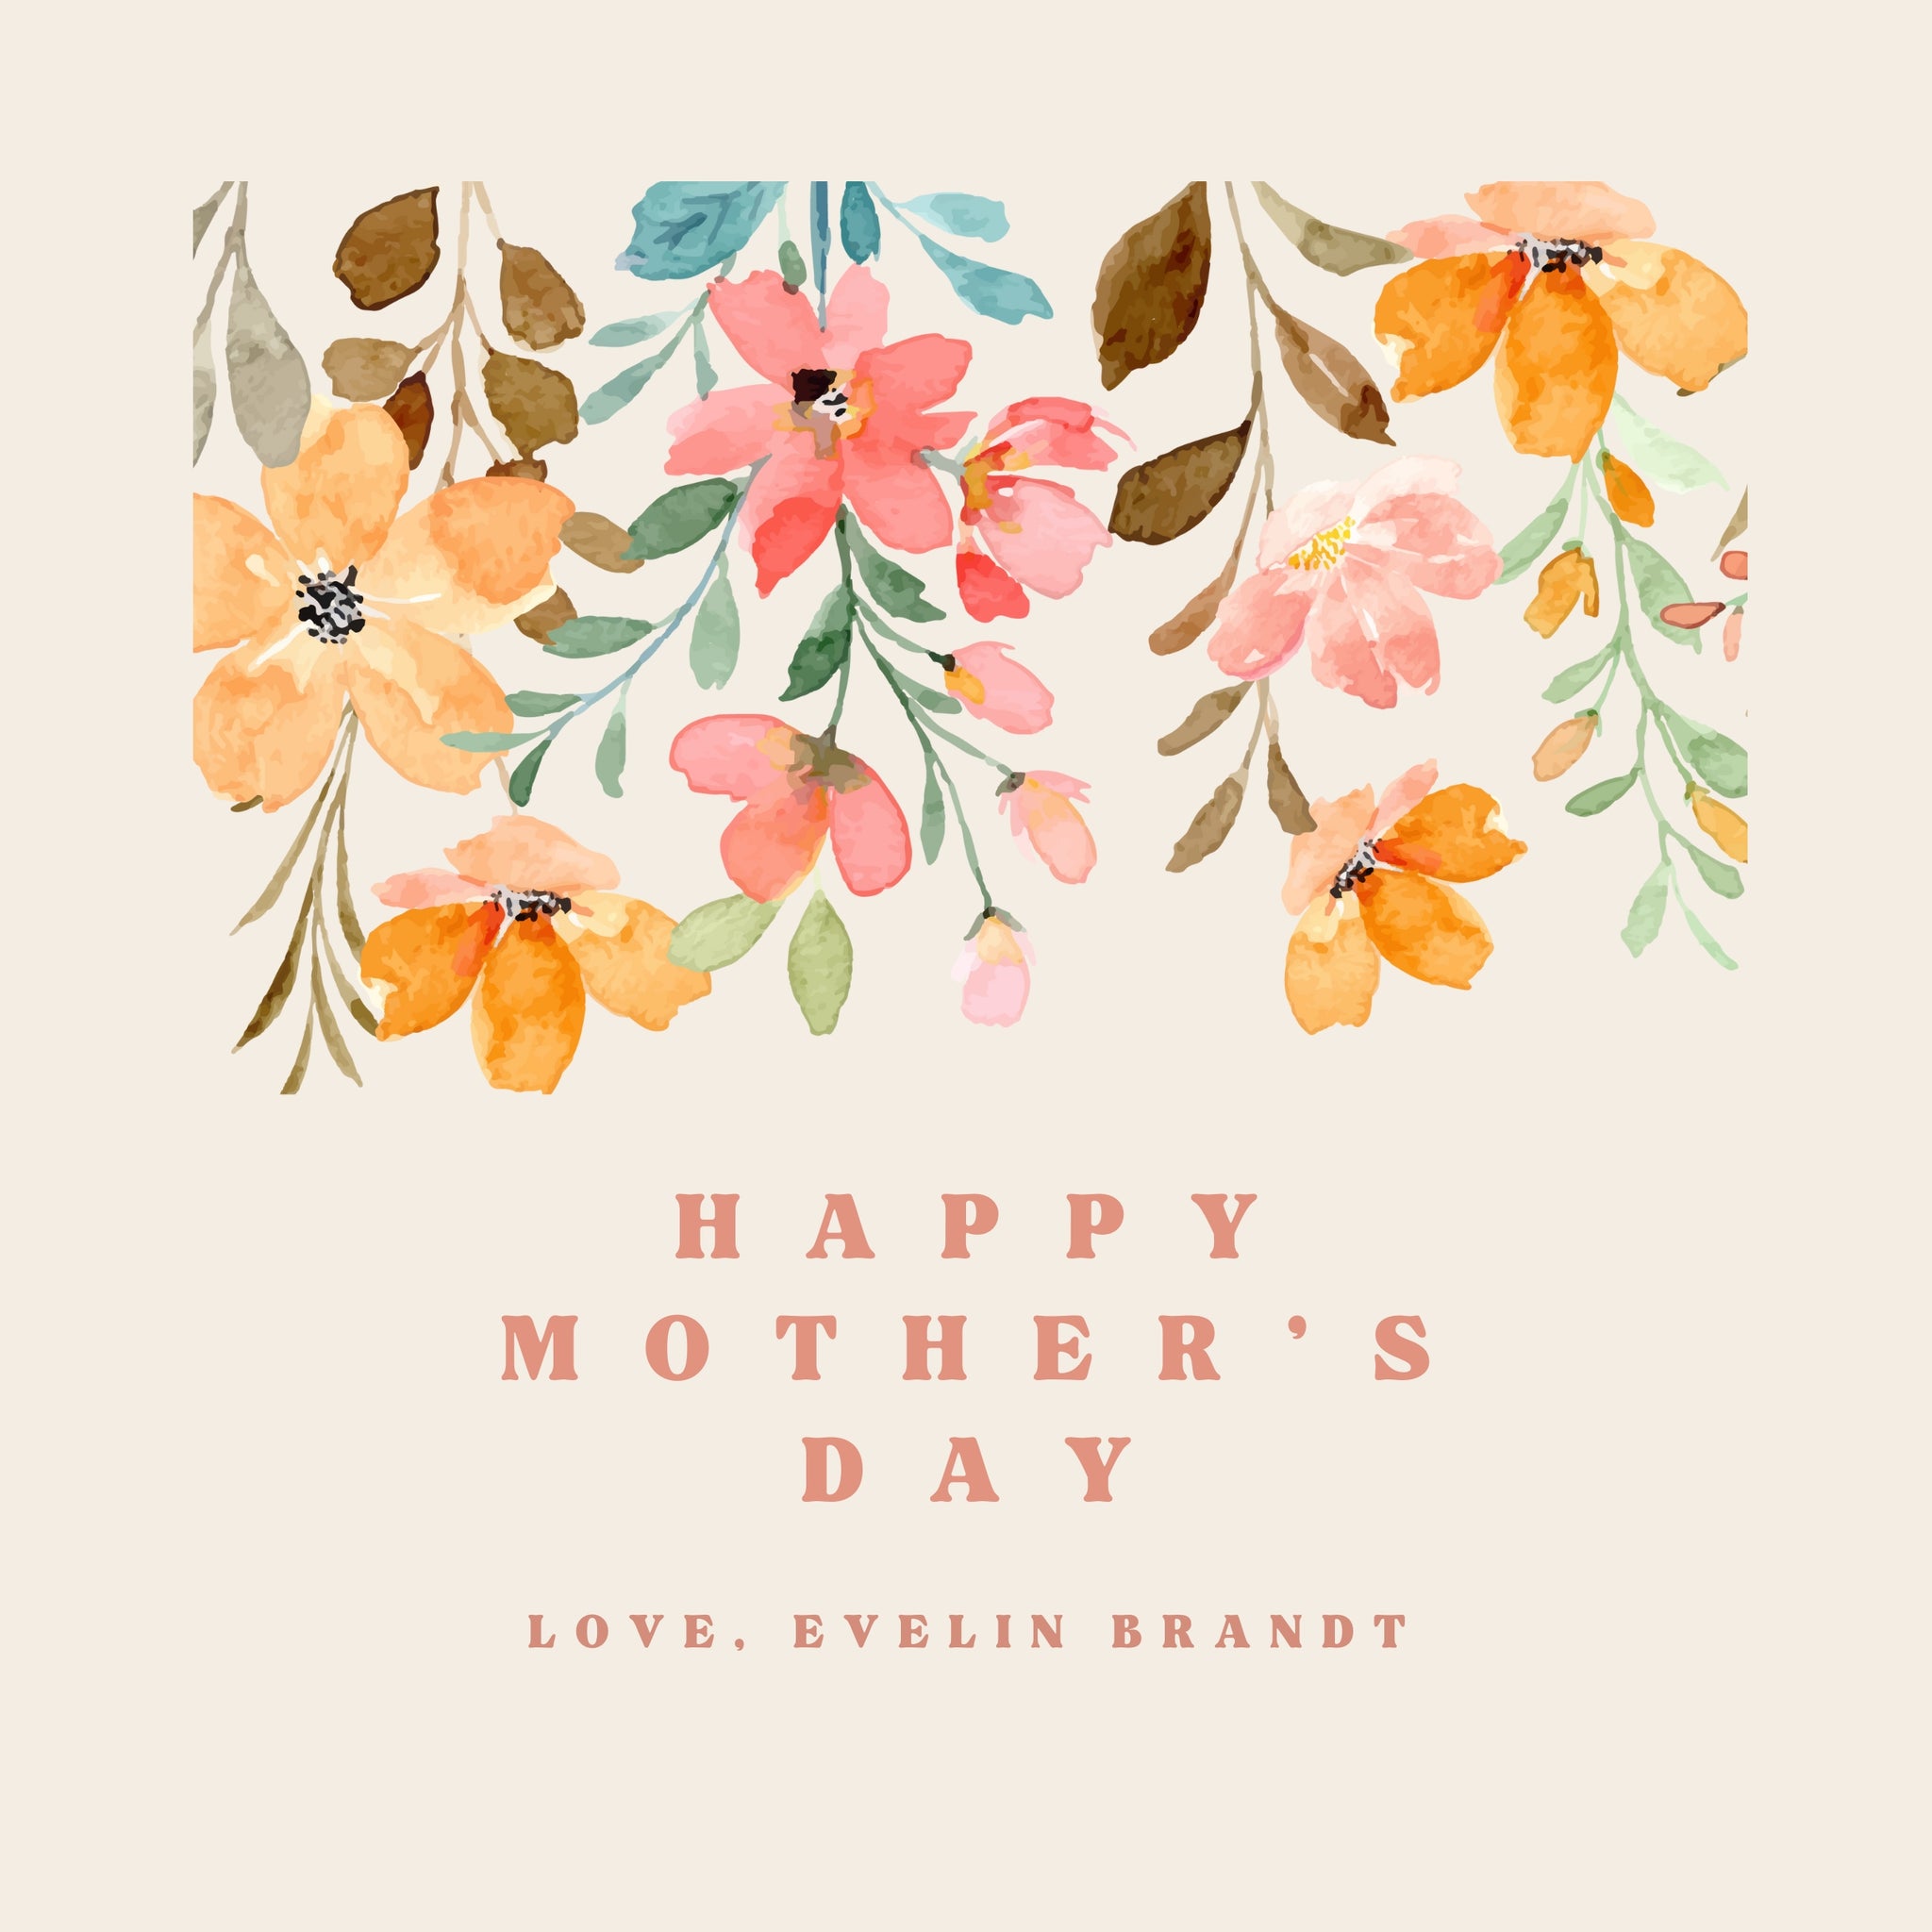 Happy Mother's Day!🌺